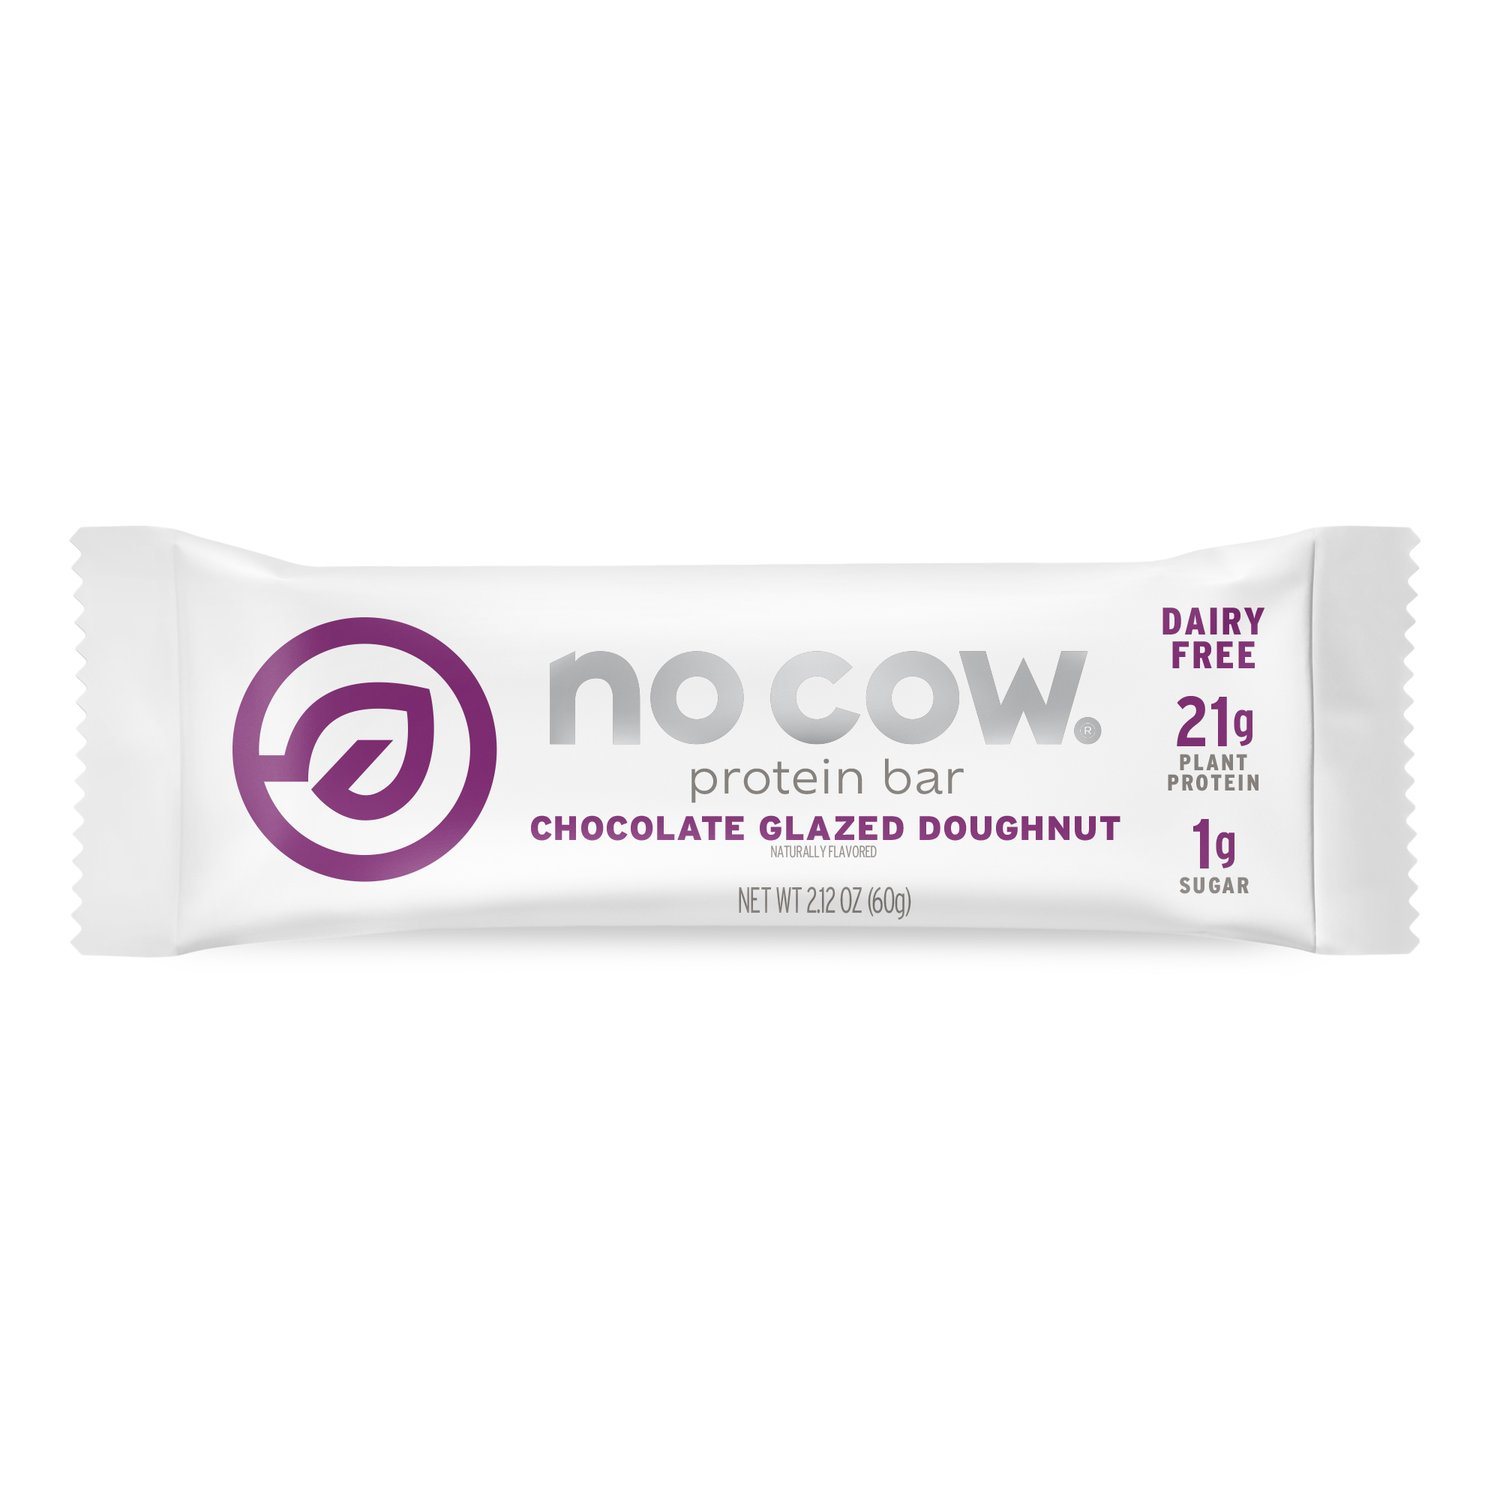 No Cow Plant Based Protein Bars No Cow Chocolate Glazed Doughnut 2.12 Ounce 